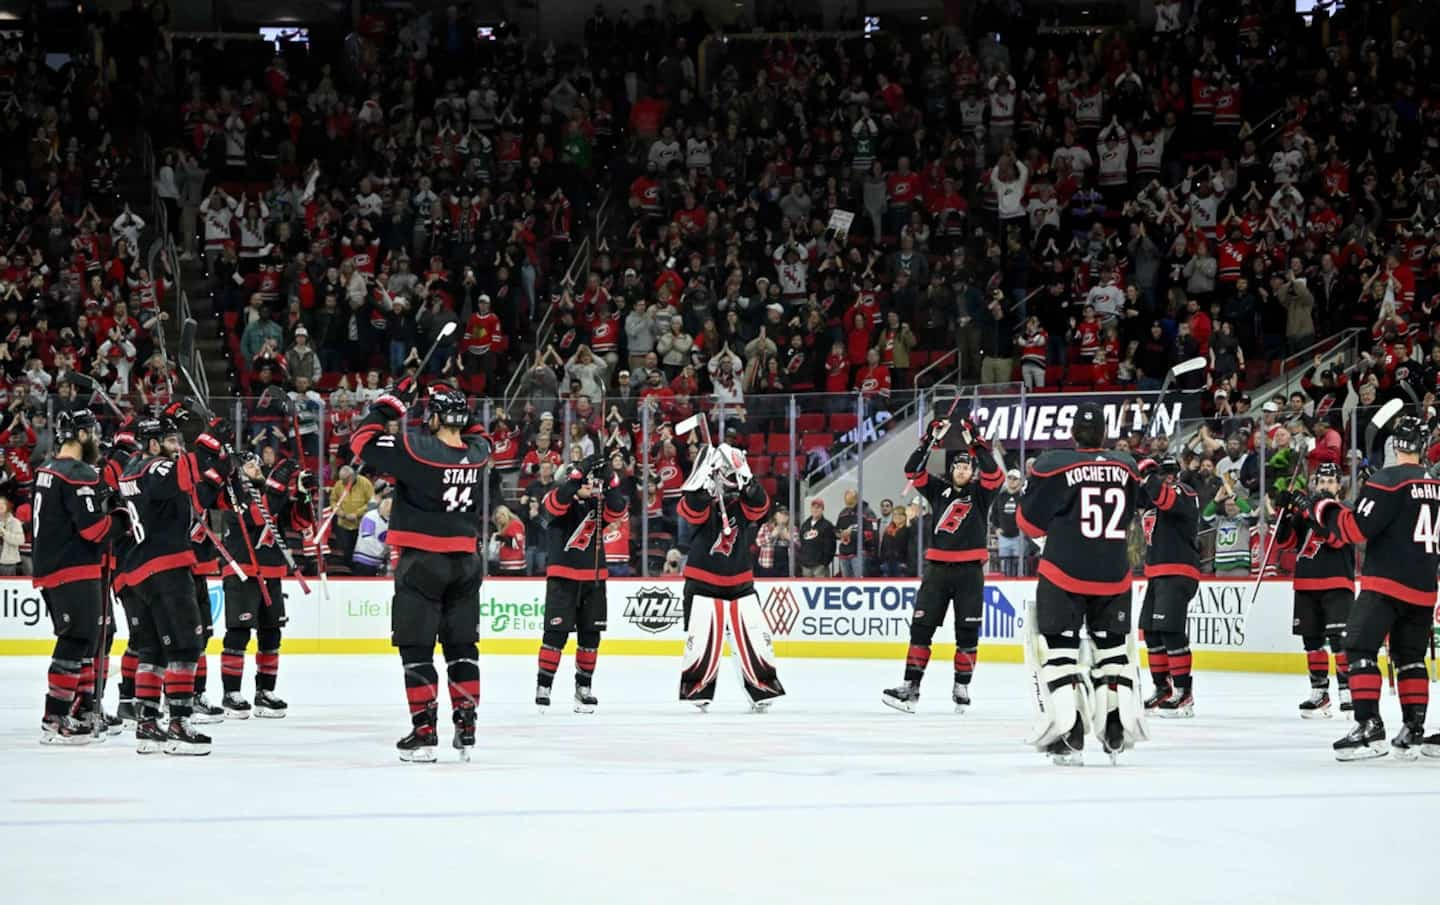 A franchise record for the Hurricanes